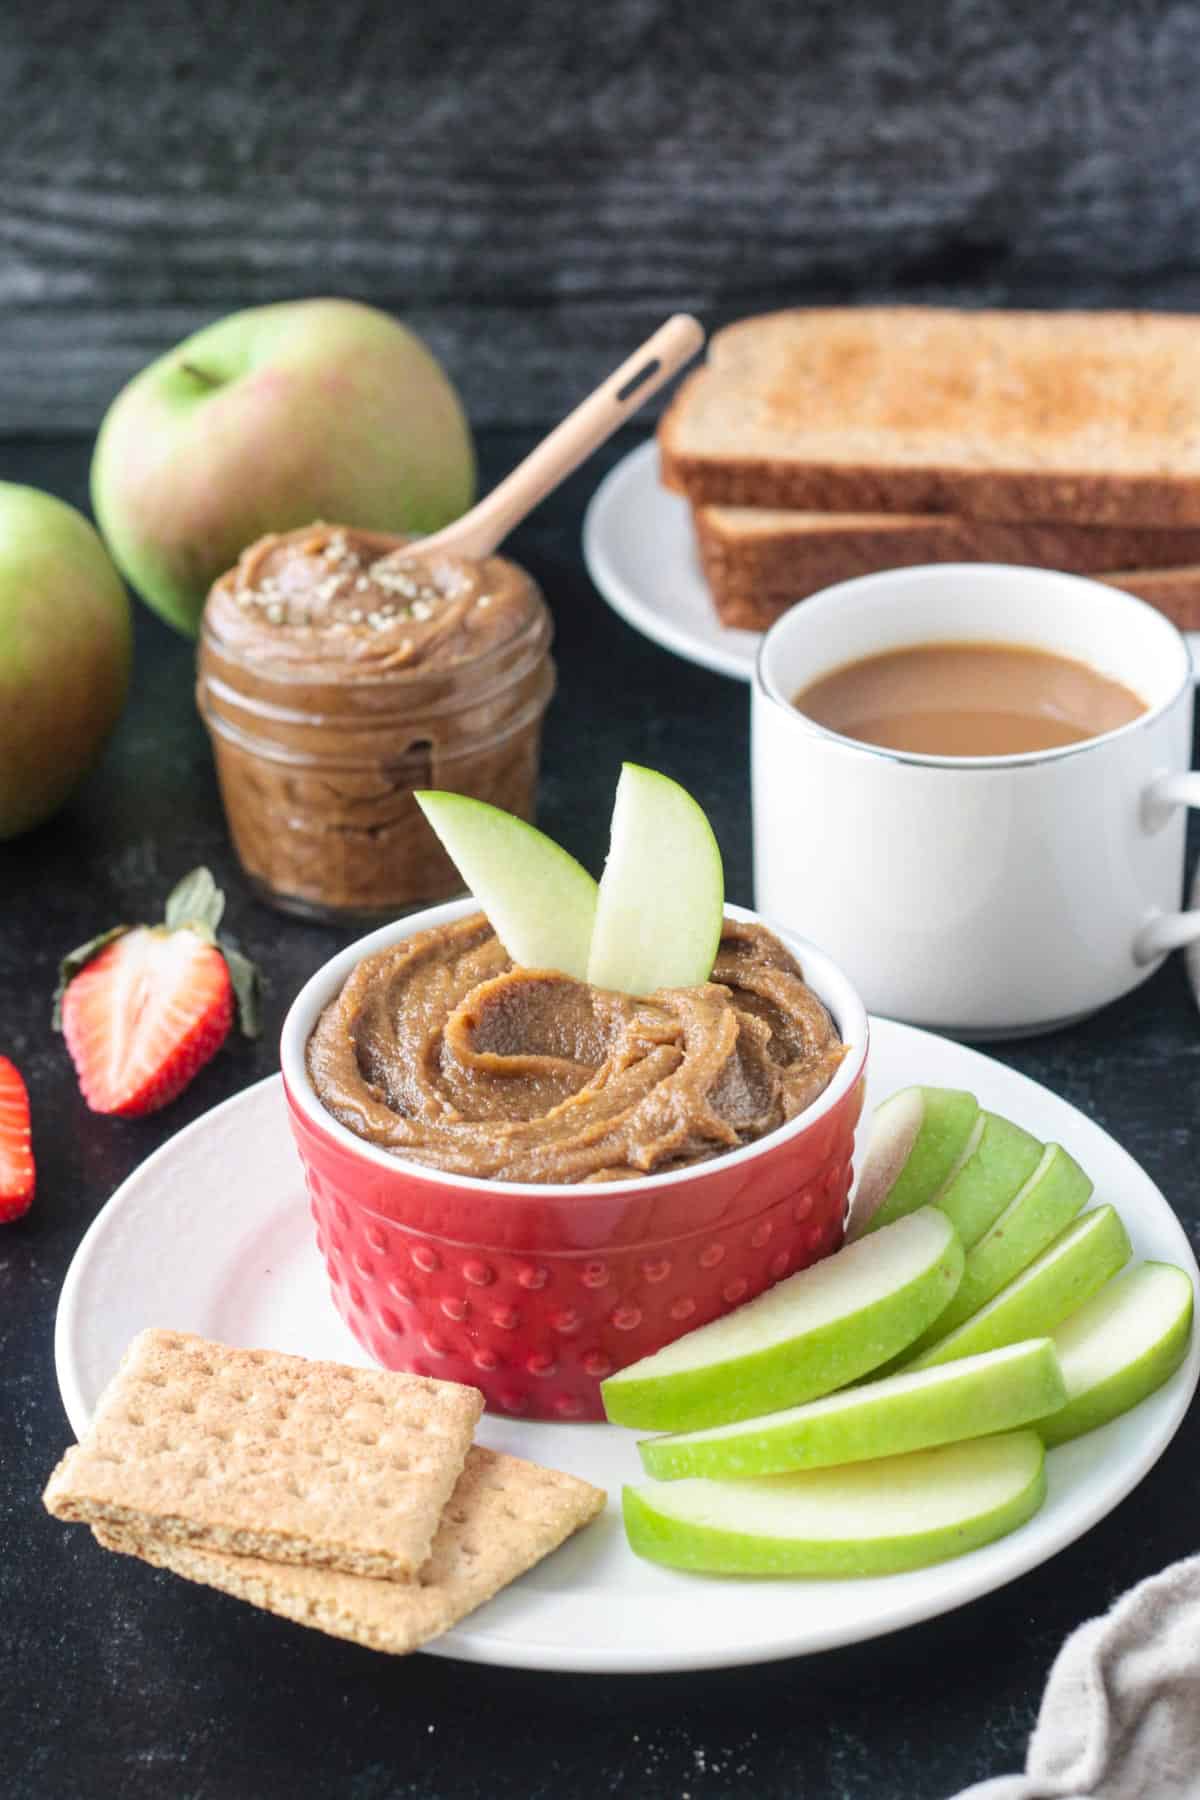 Two apple slices in a bowl of cookie butter next to a cup of coffee and stack of toast.